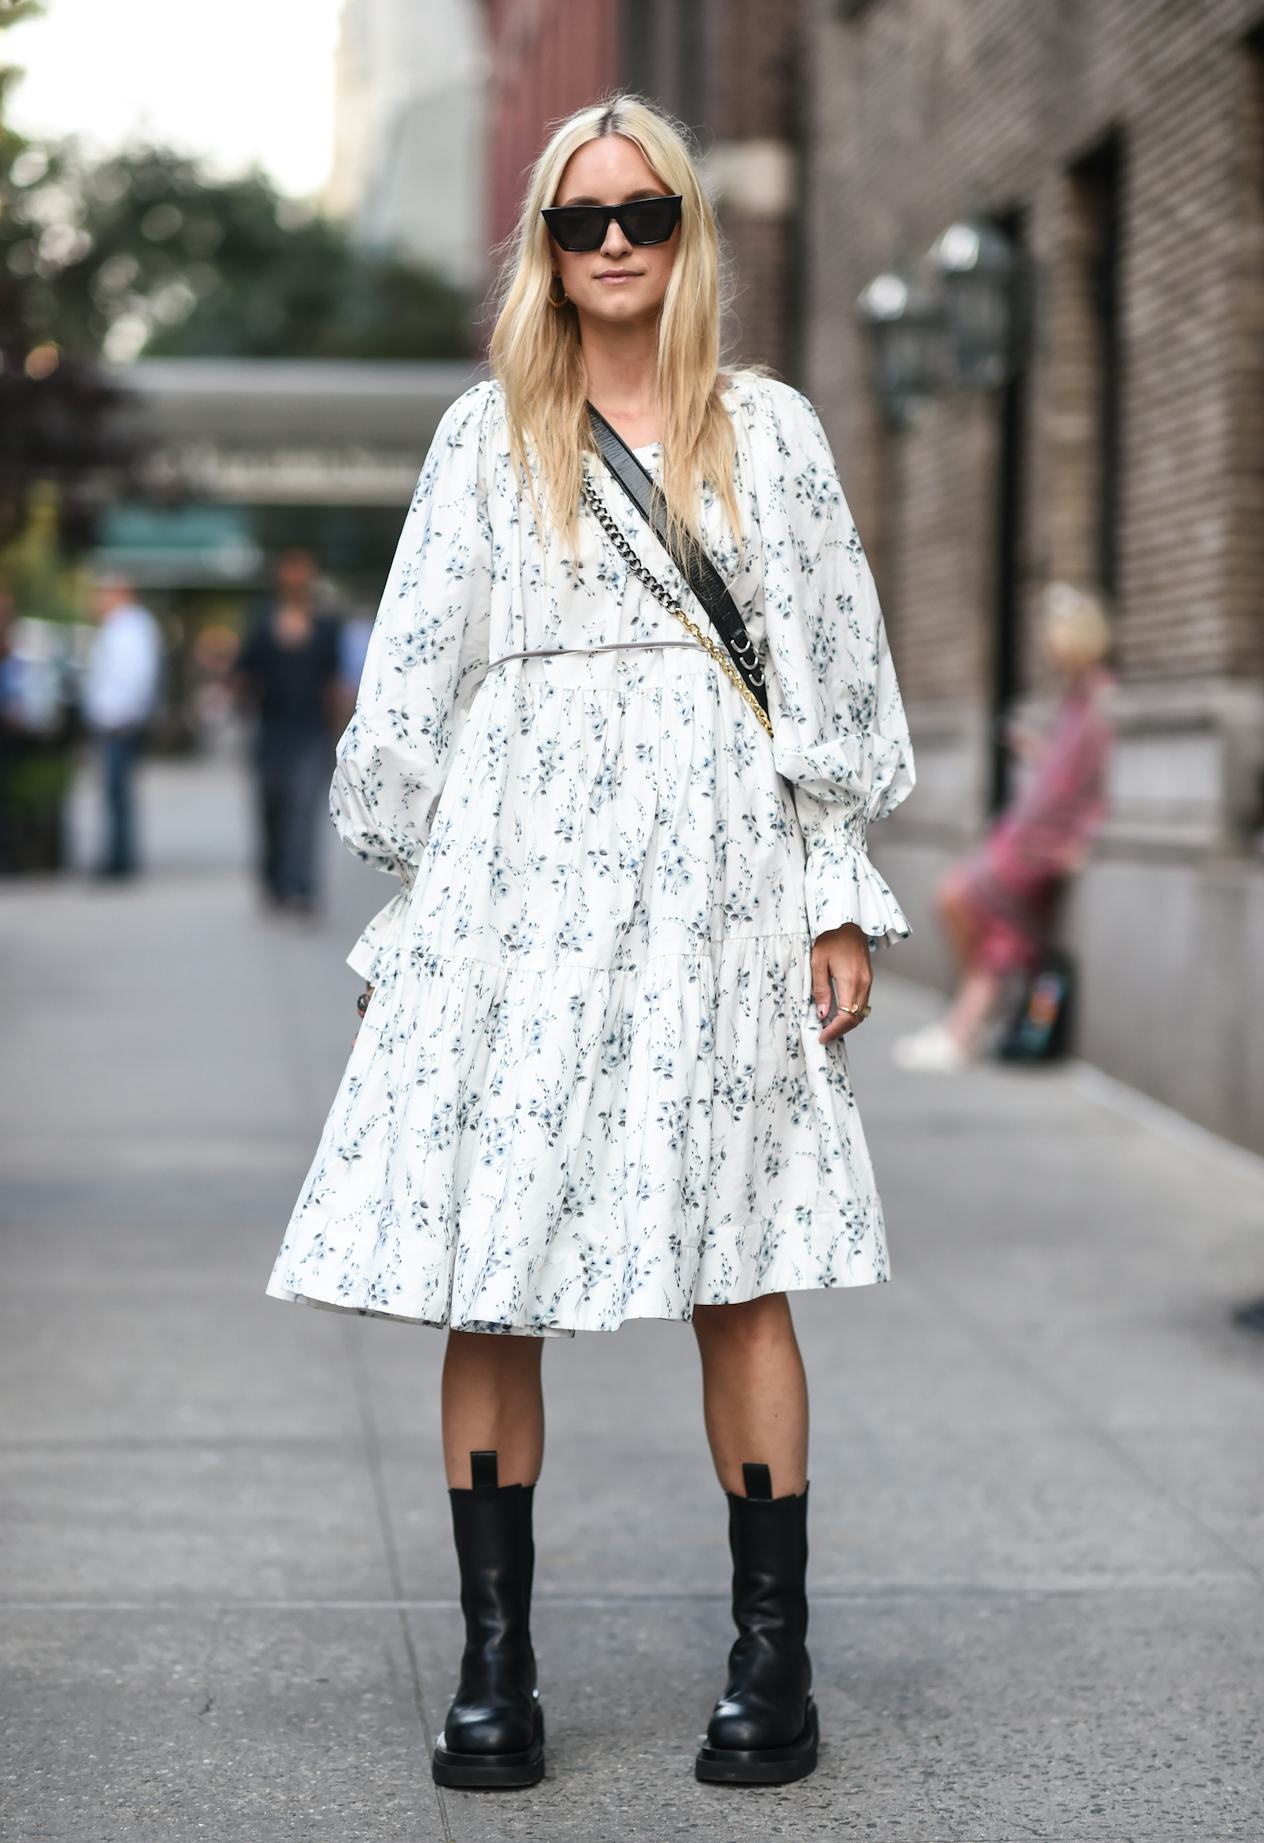 7 Spring Outfit Ideas You'll Wear On Repeat Next Season